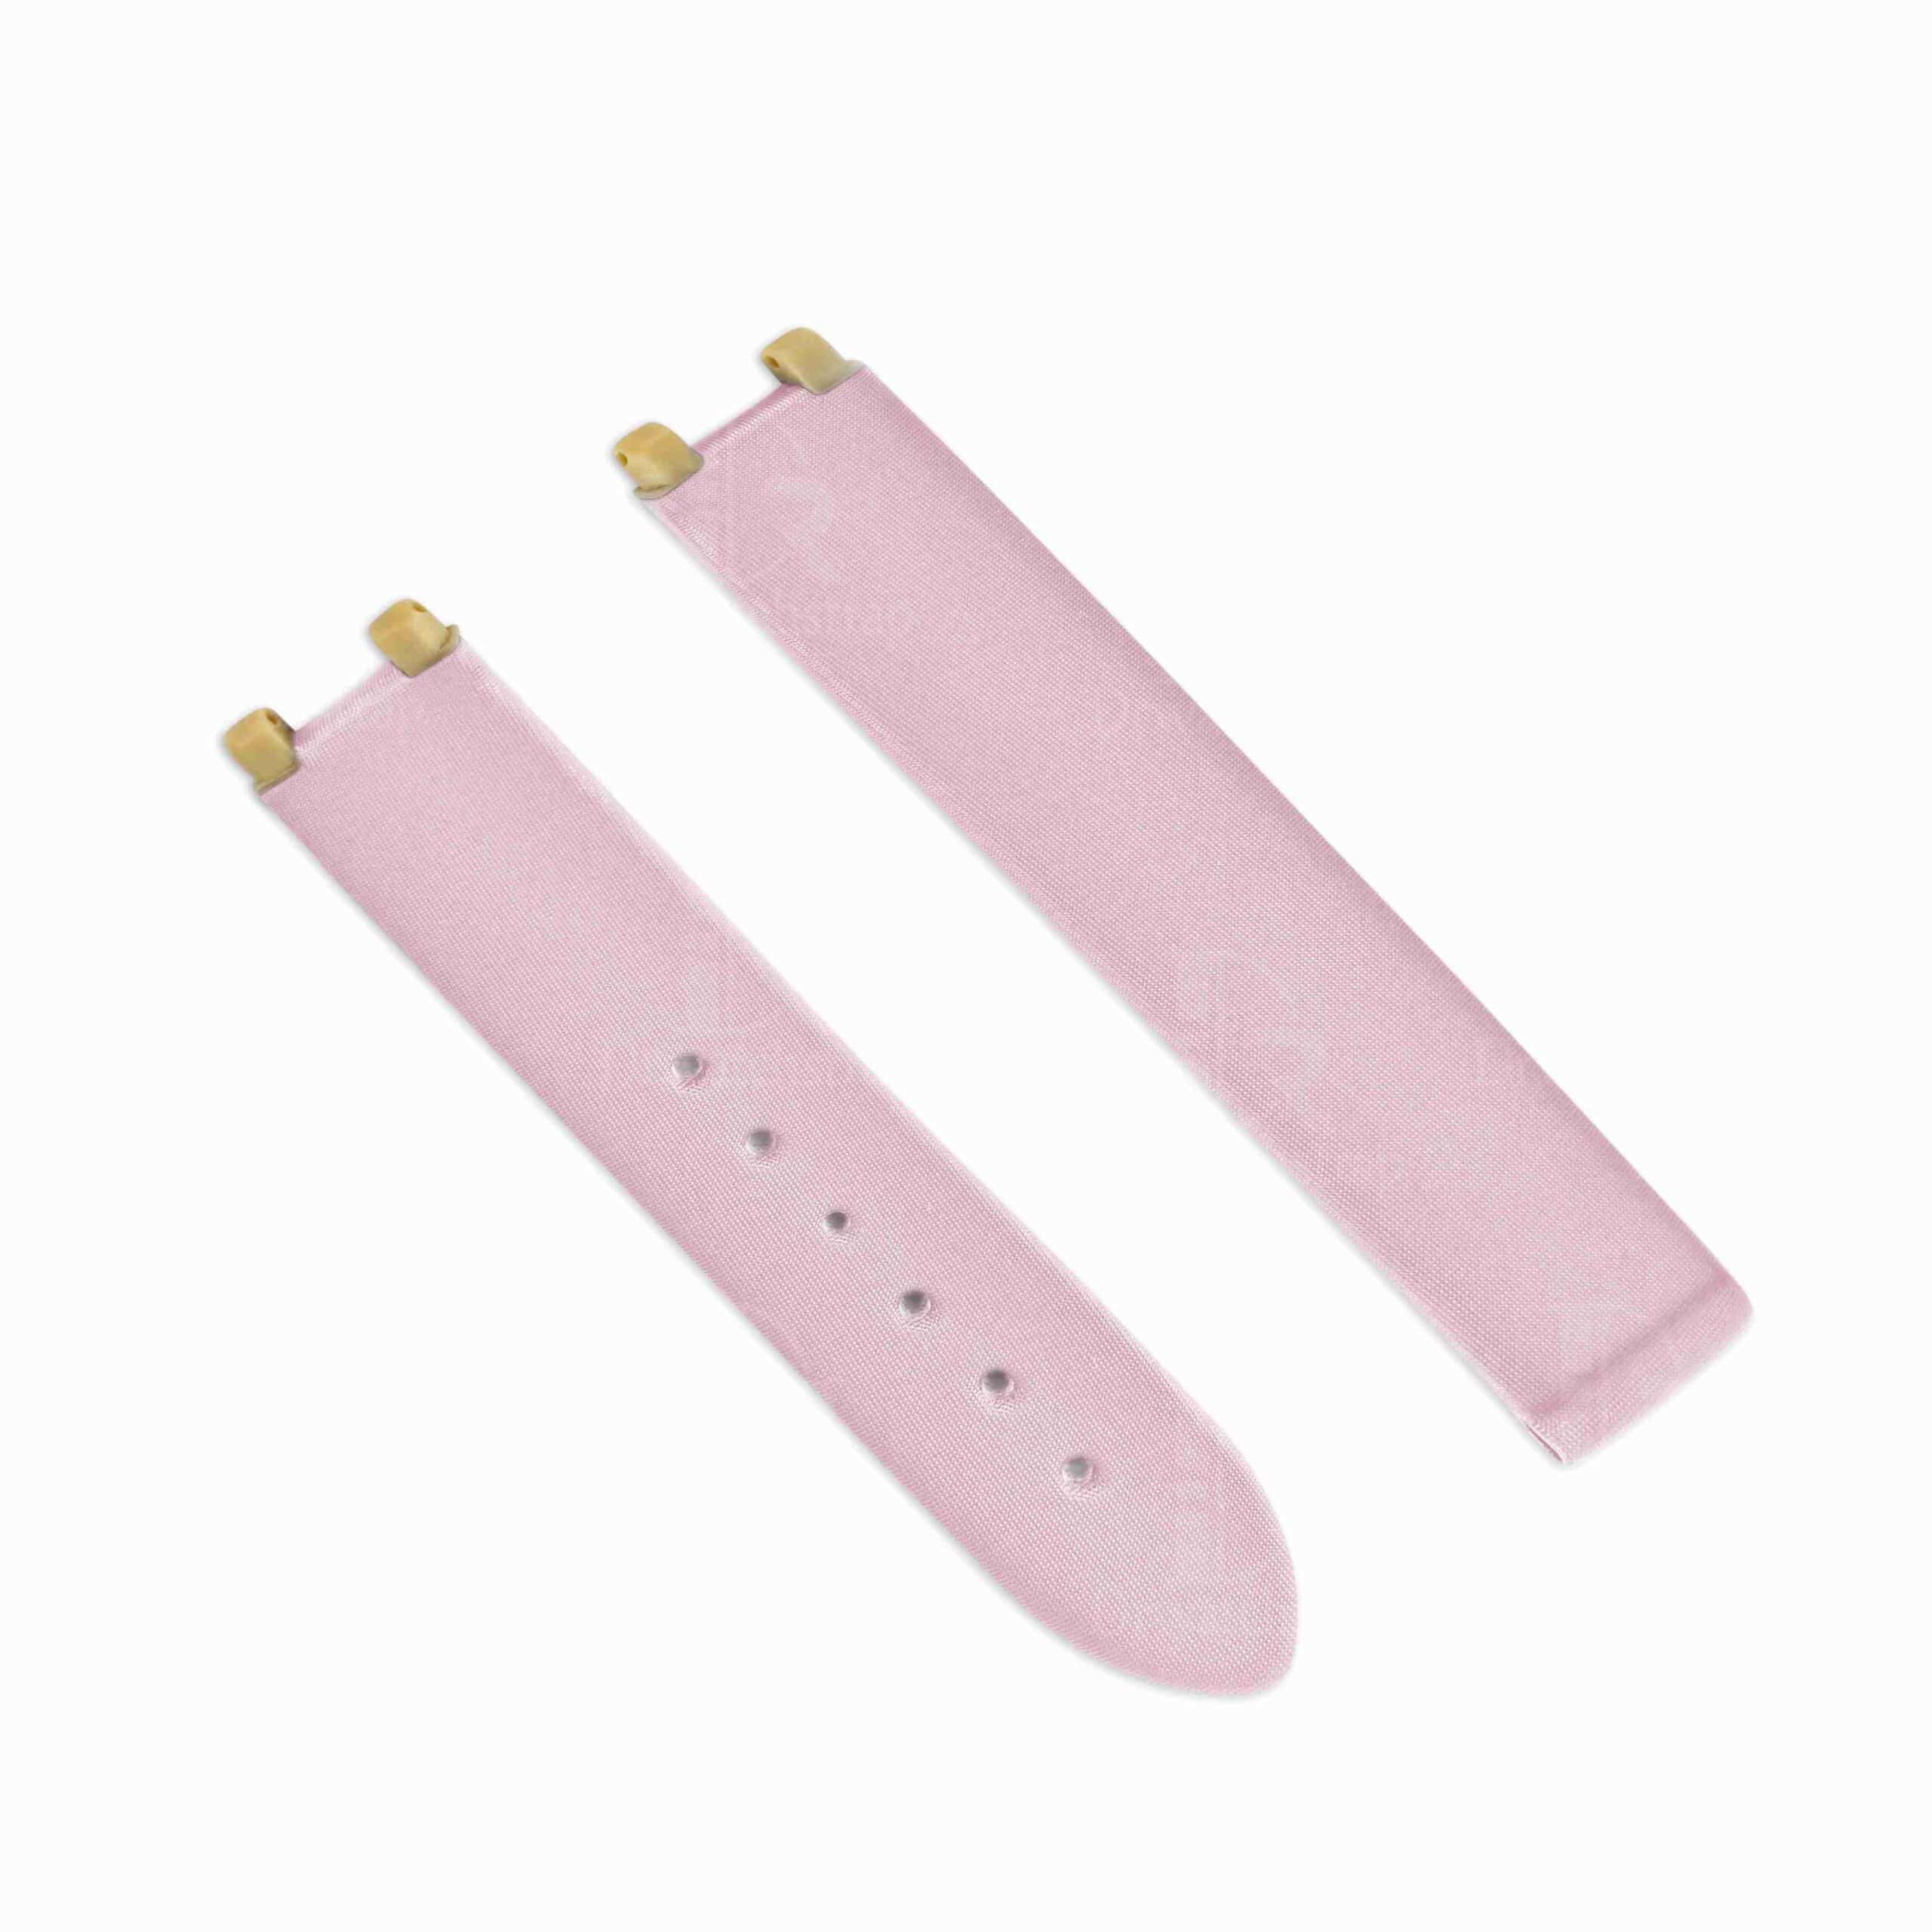 replacement pink satin ribbon replacement watch band strap fit for omega de ville ladymatic